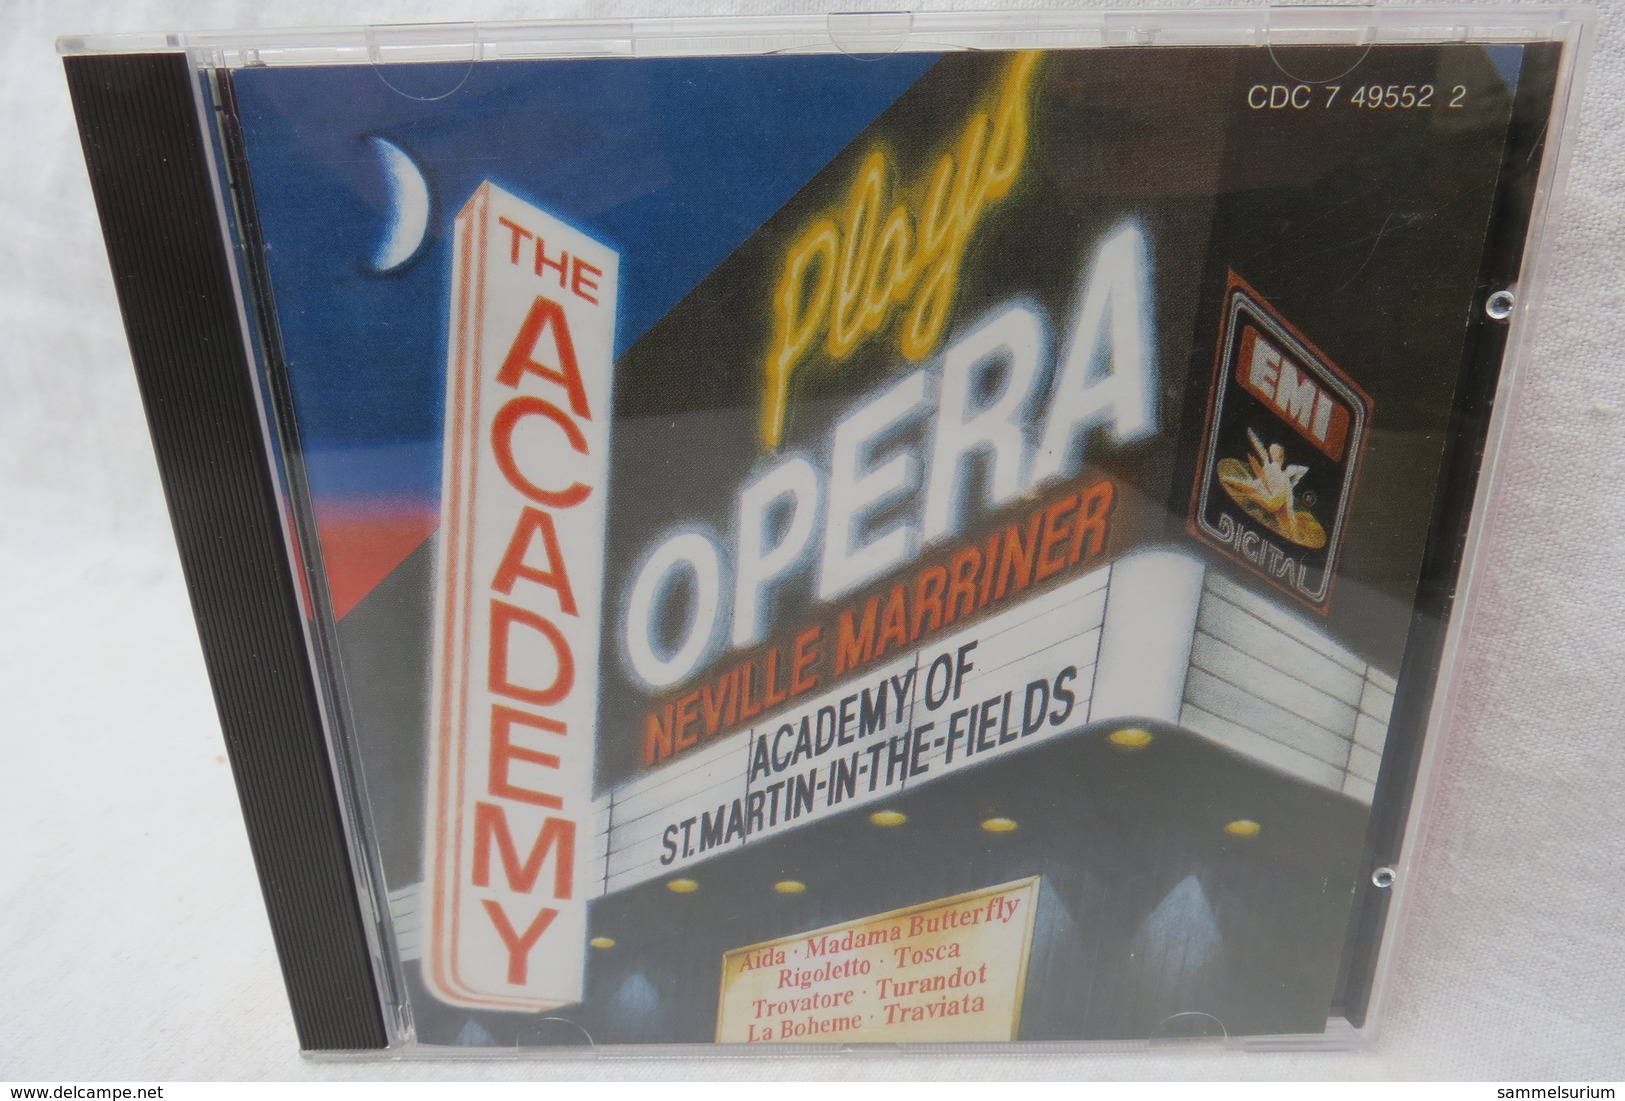 CD "The Academy Plays Opera" Neville Marriner - Opere